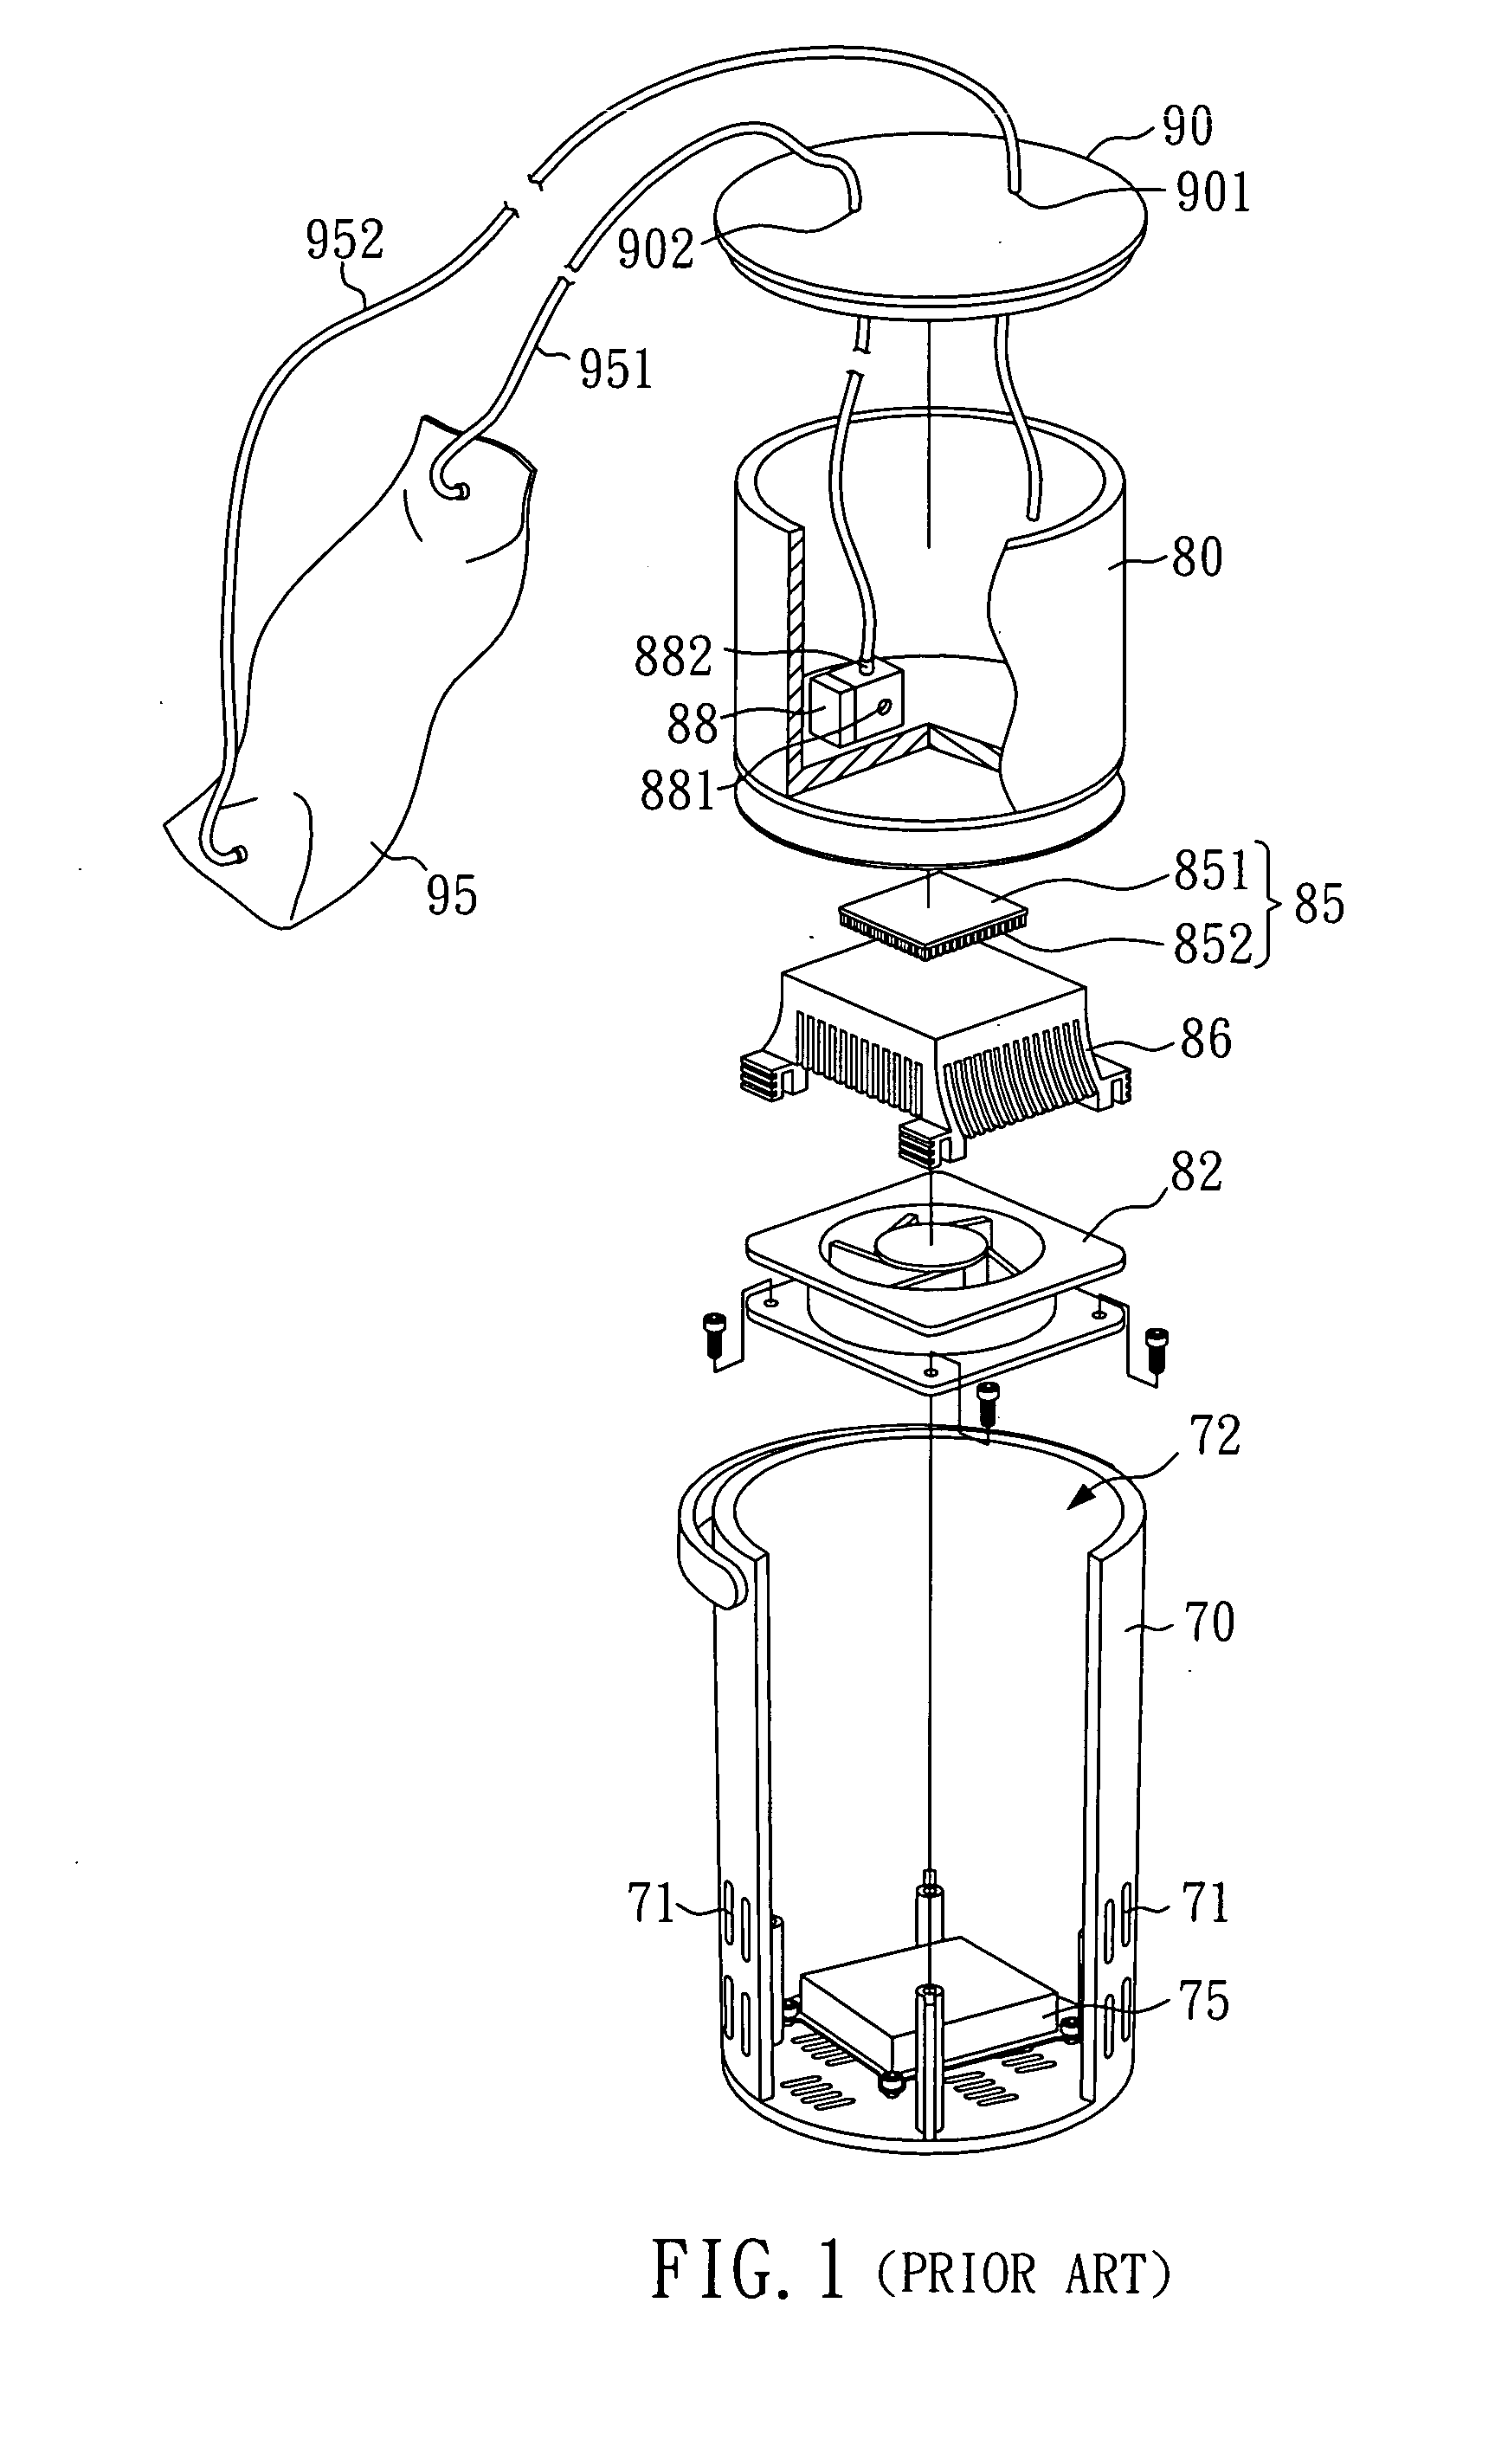 Cold/hot therapy device with temperature control